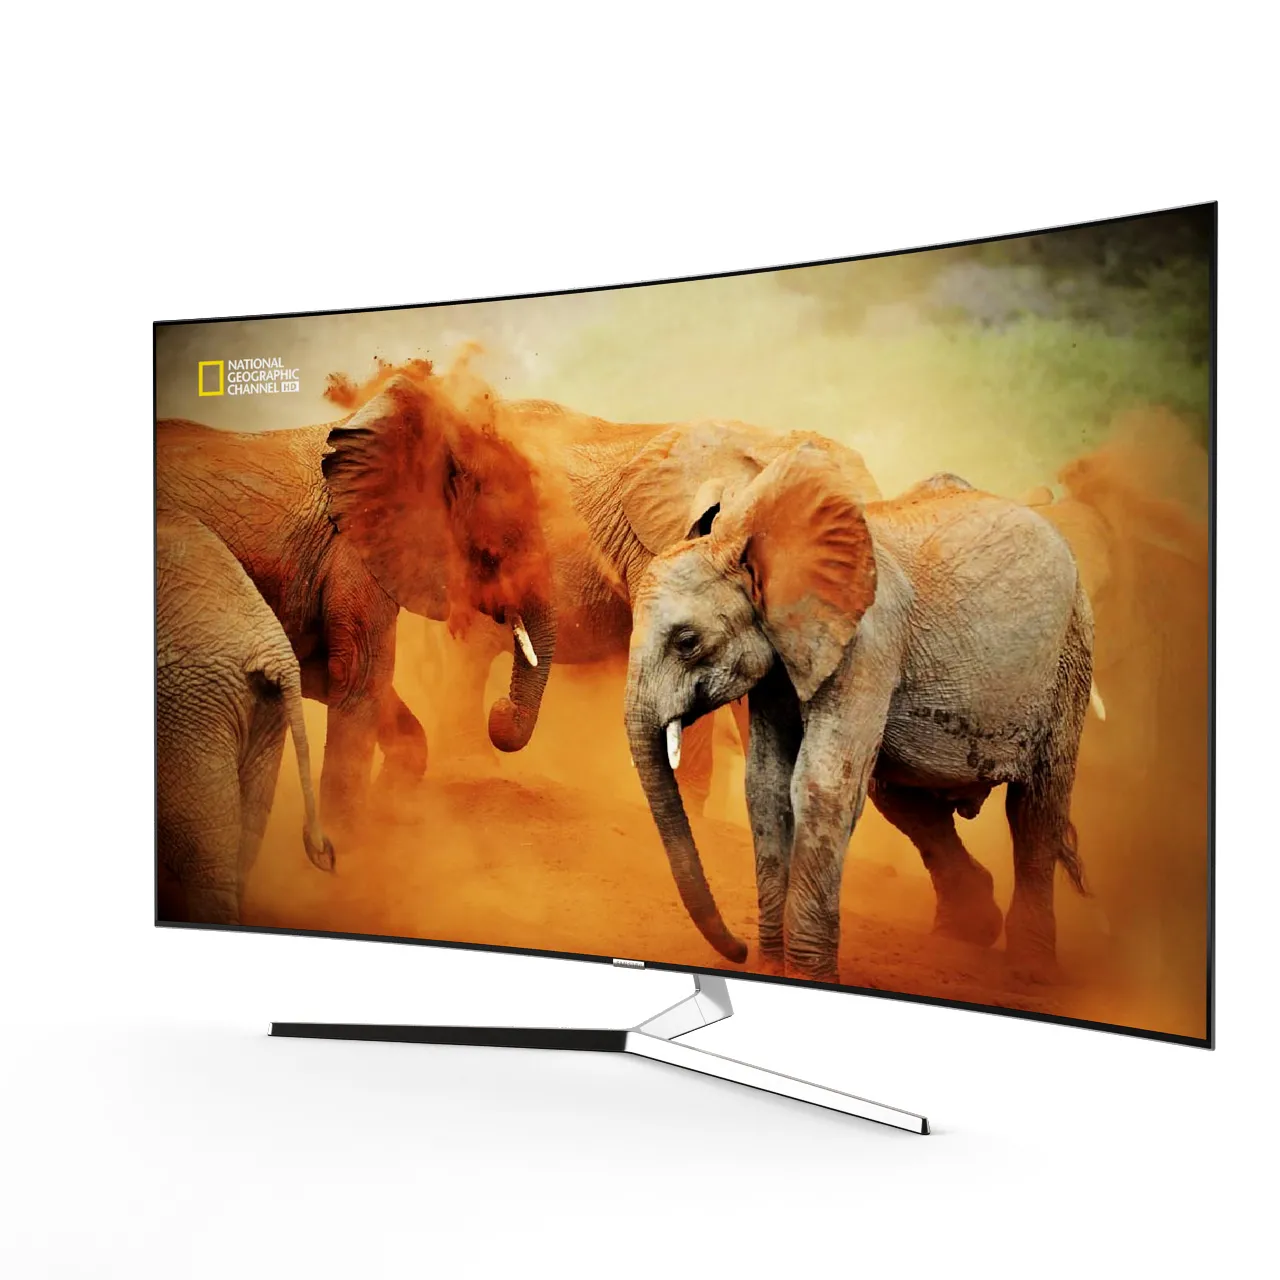 Products – ks9500-curved-4k-suhd-tv-by-samsung